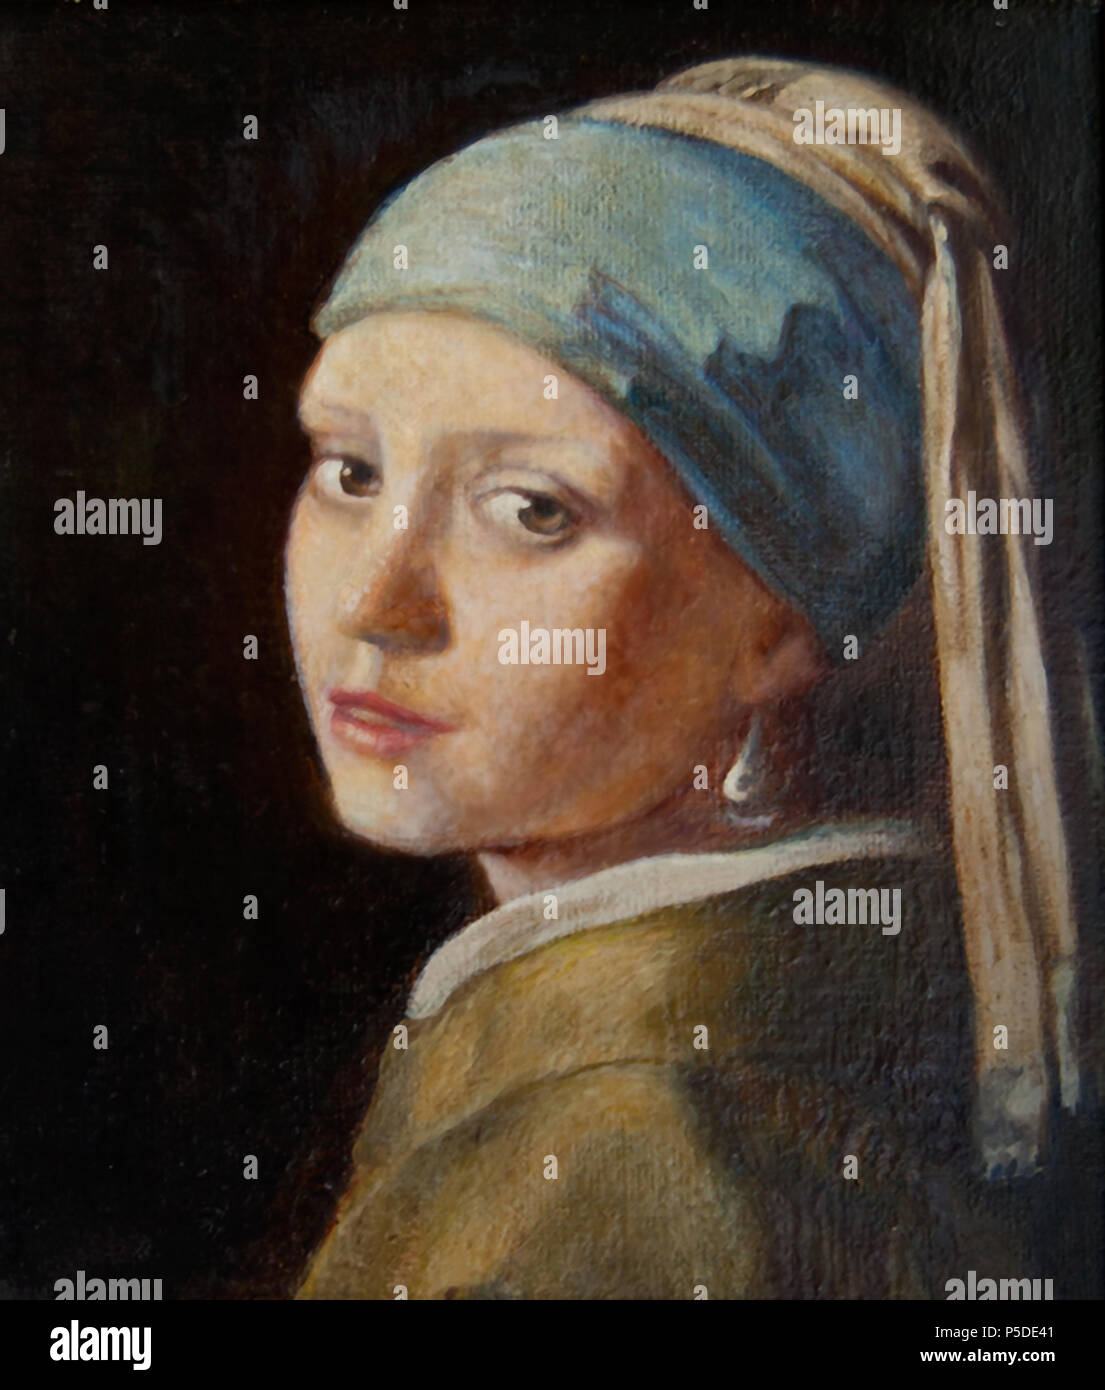 English: Girl with a Pearl Earring . Copy by Lawrence Saint of the painting of the same name by Jan Vermeer (1632-1675) . circa 1950. Lawrence Saint, after   Johannes Vermeer  (1632–1675)      Alternative names Johannes van der Meer, Jan Vermeer, Jan Vermeer van Delft, Johannes Reyniersz. Vermeer  Description Dutch painter and art dealer  Date of birth/death 31 October 1632 (baptised) 15 December 1675 (buried)  Location of birth/death Delft Delft  Work period 1653–1675  Work location Delft (1653–1675)  Authority control  : Q41264 VIAF: 51961439 ISNI: 0000 0001 0901 268X ULAN: 500032927 LCCN: n Stock Photo